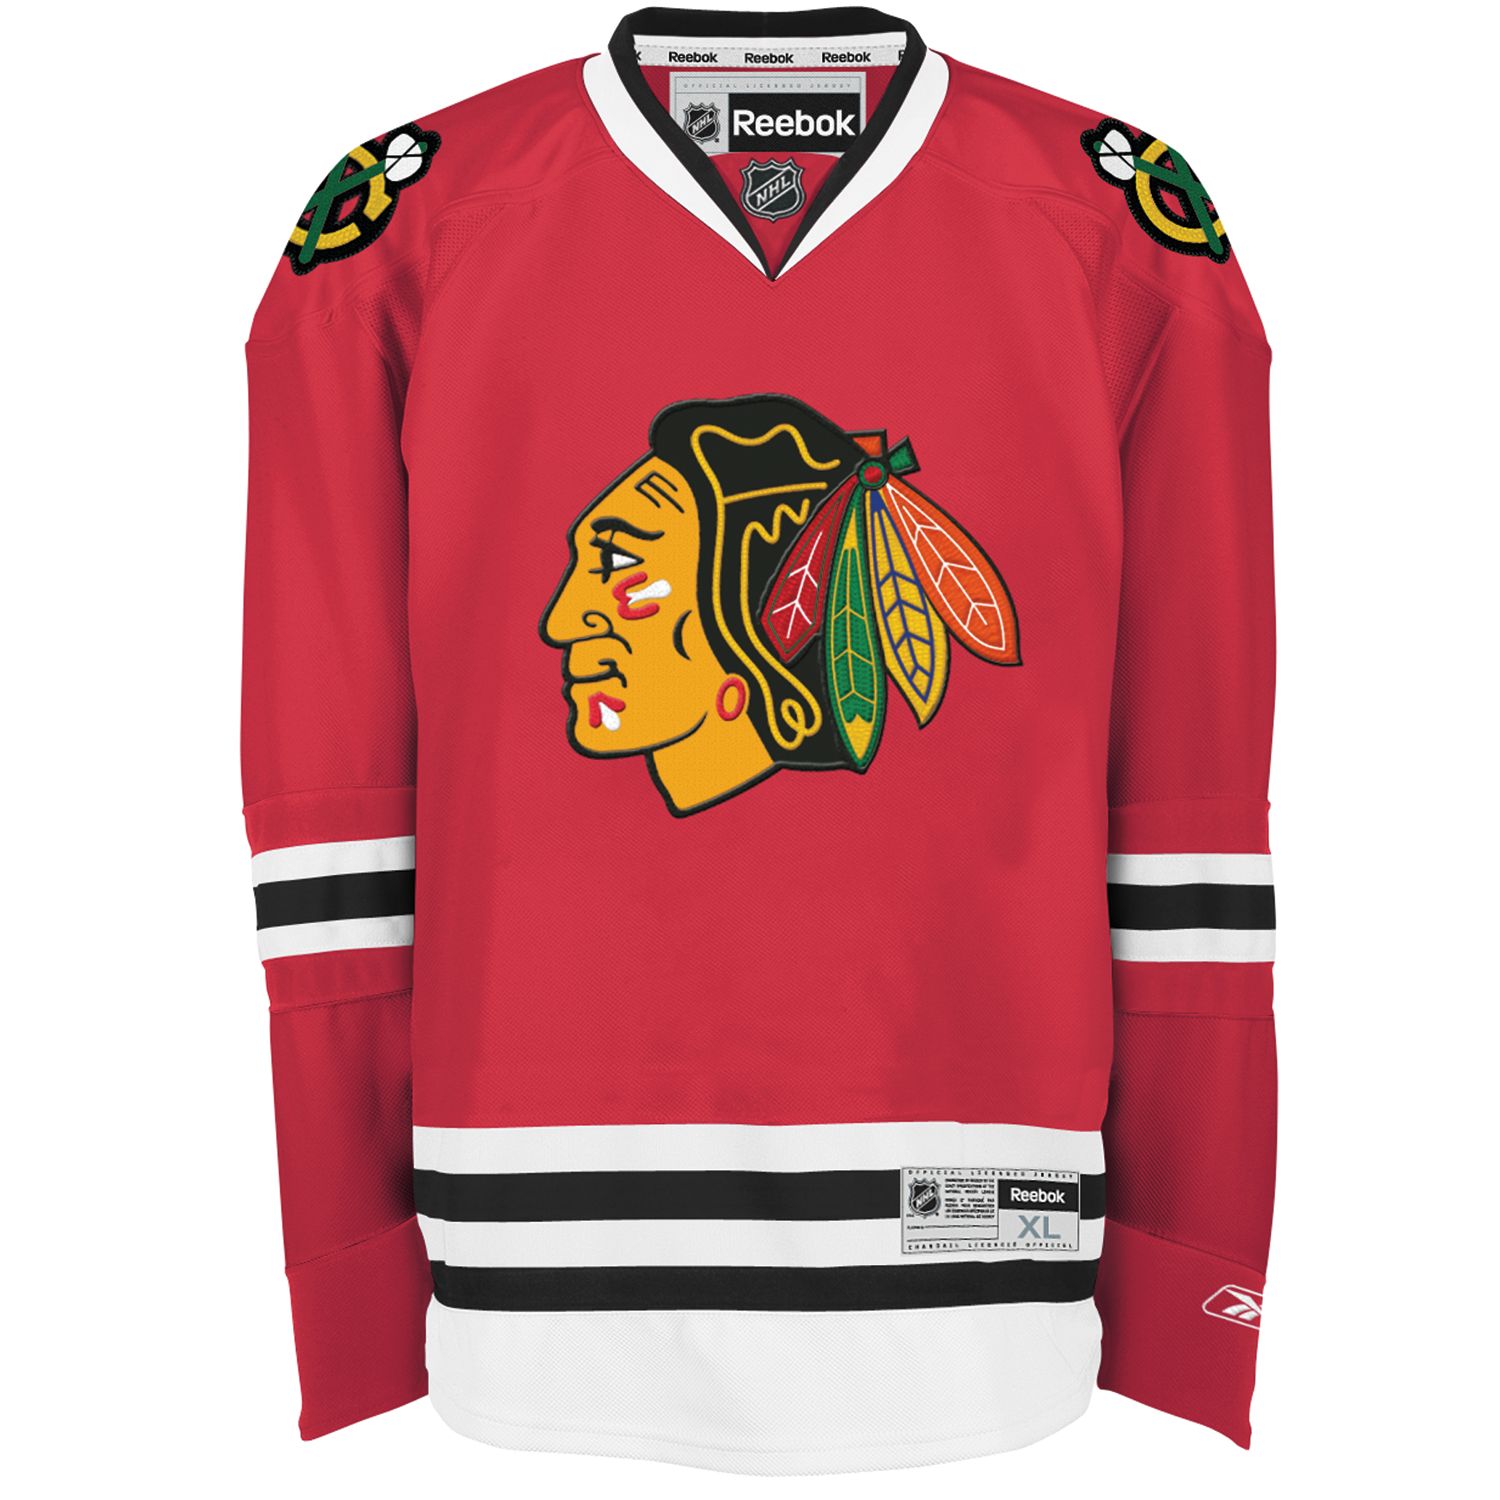 where to buy a blackhawks jersey